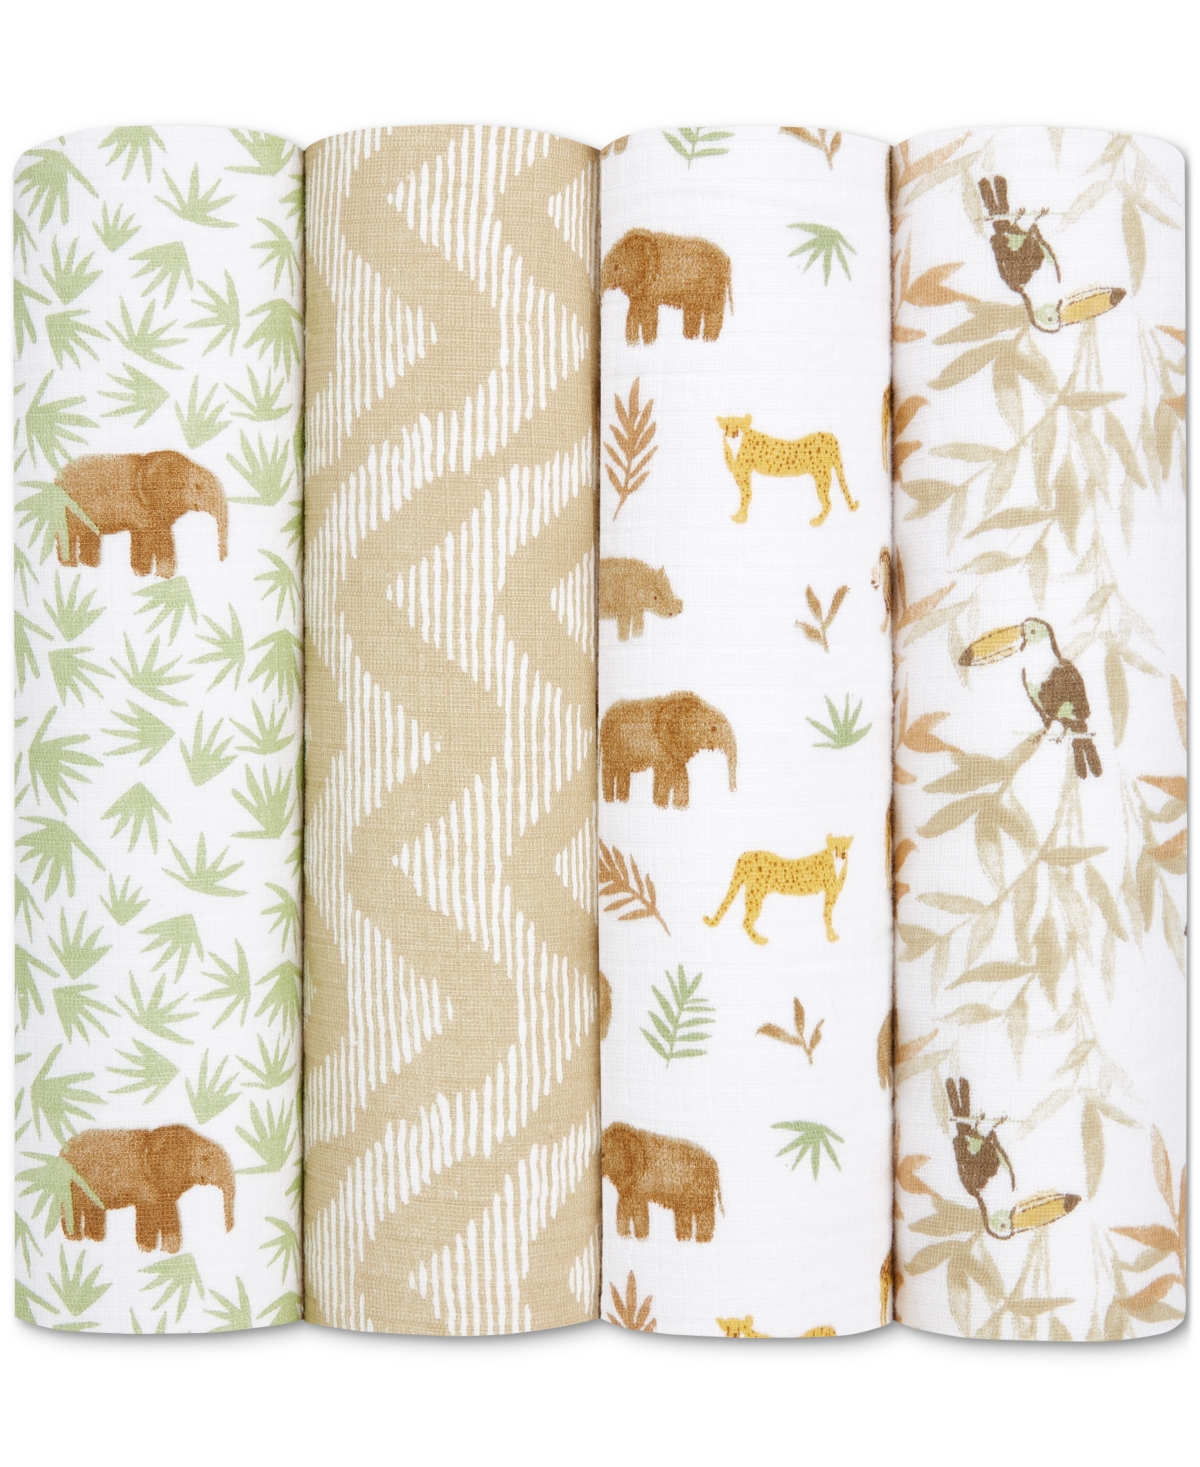 Aden By Aden + Anais Baby Tanzania Muslin Swaddles, Pack Of 4